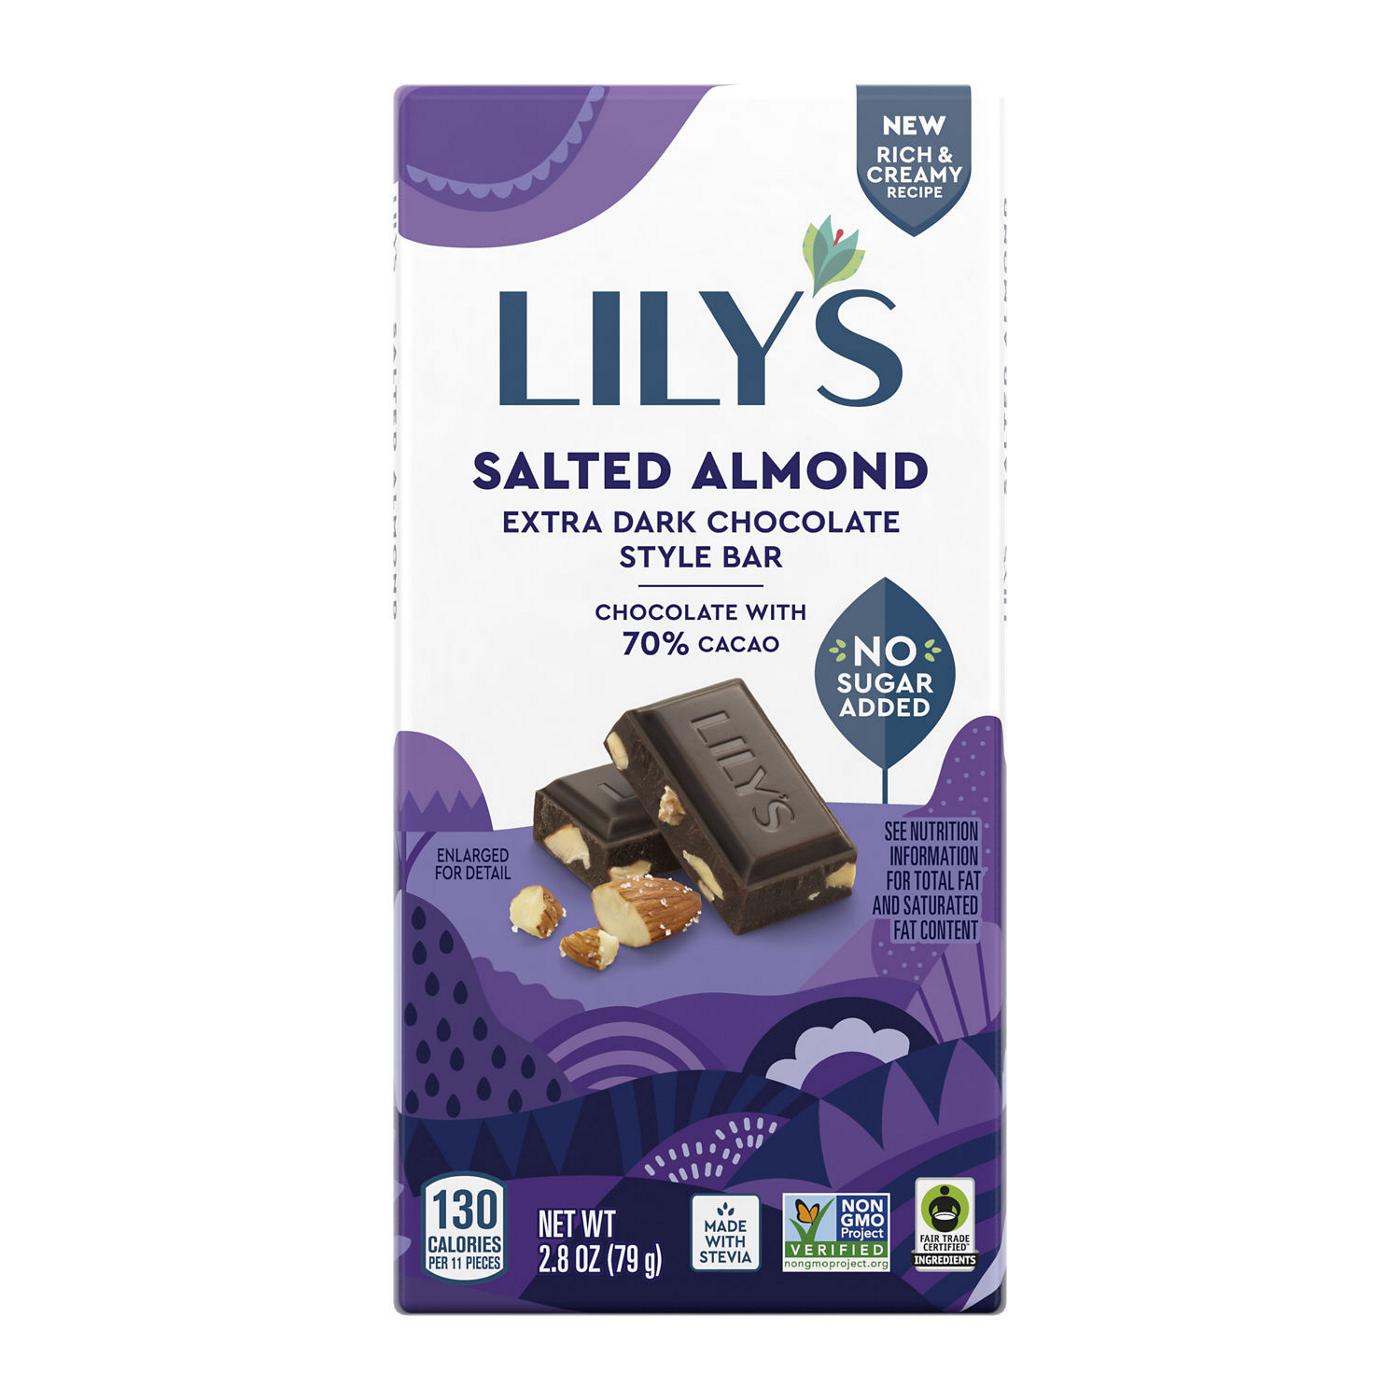 Lily's Salted Almond Extra Dark Chocolate Style Bar; image 1 of 5